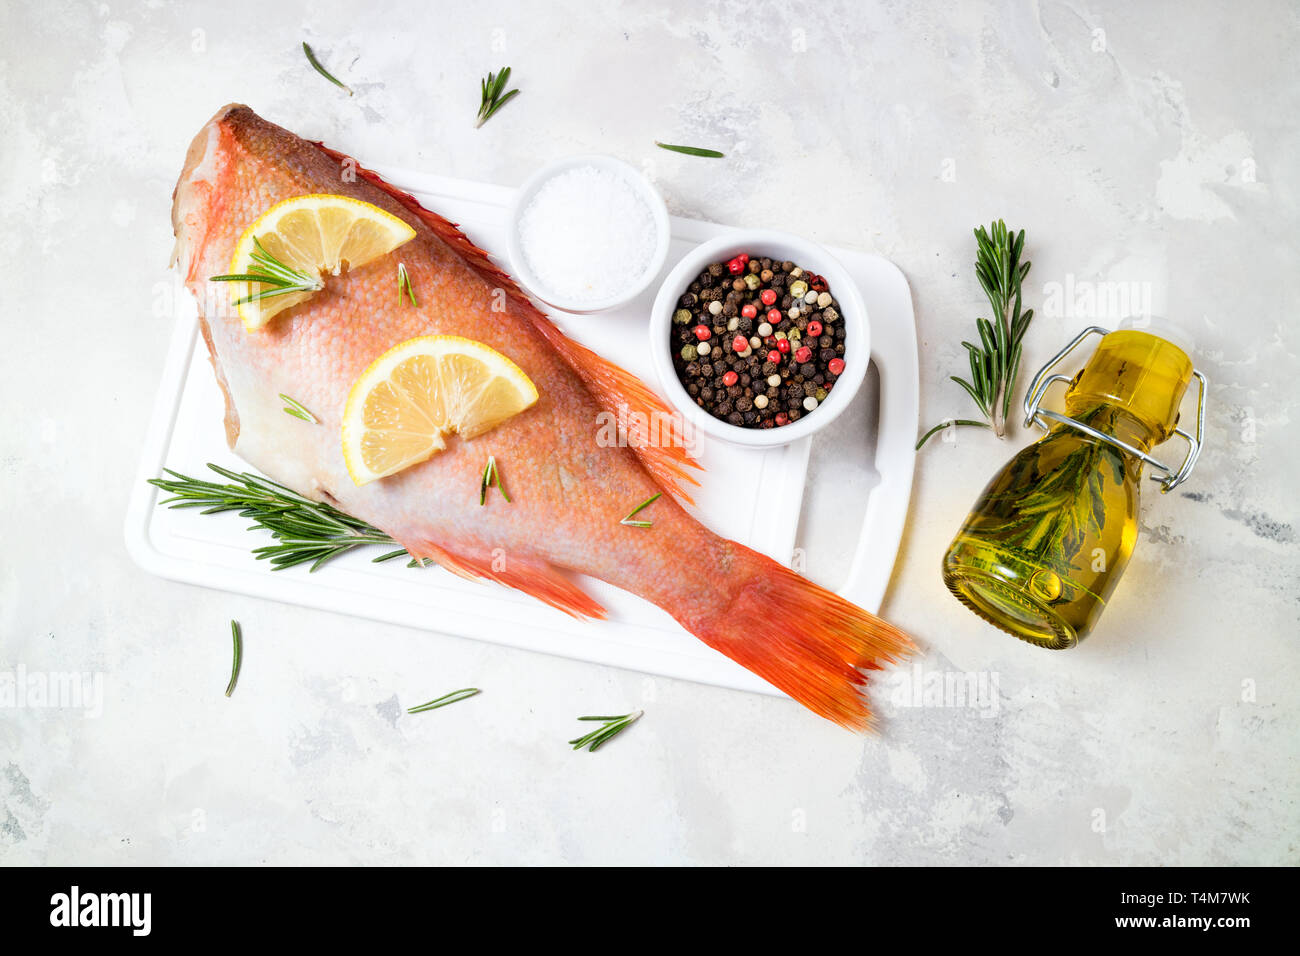 Fish raw snapper with lemon slices, herbs rosemary, salt and pepper on white background. Healthy food and dieting concept. Top view, copy space Stock Photo